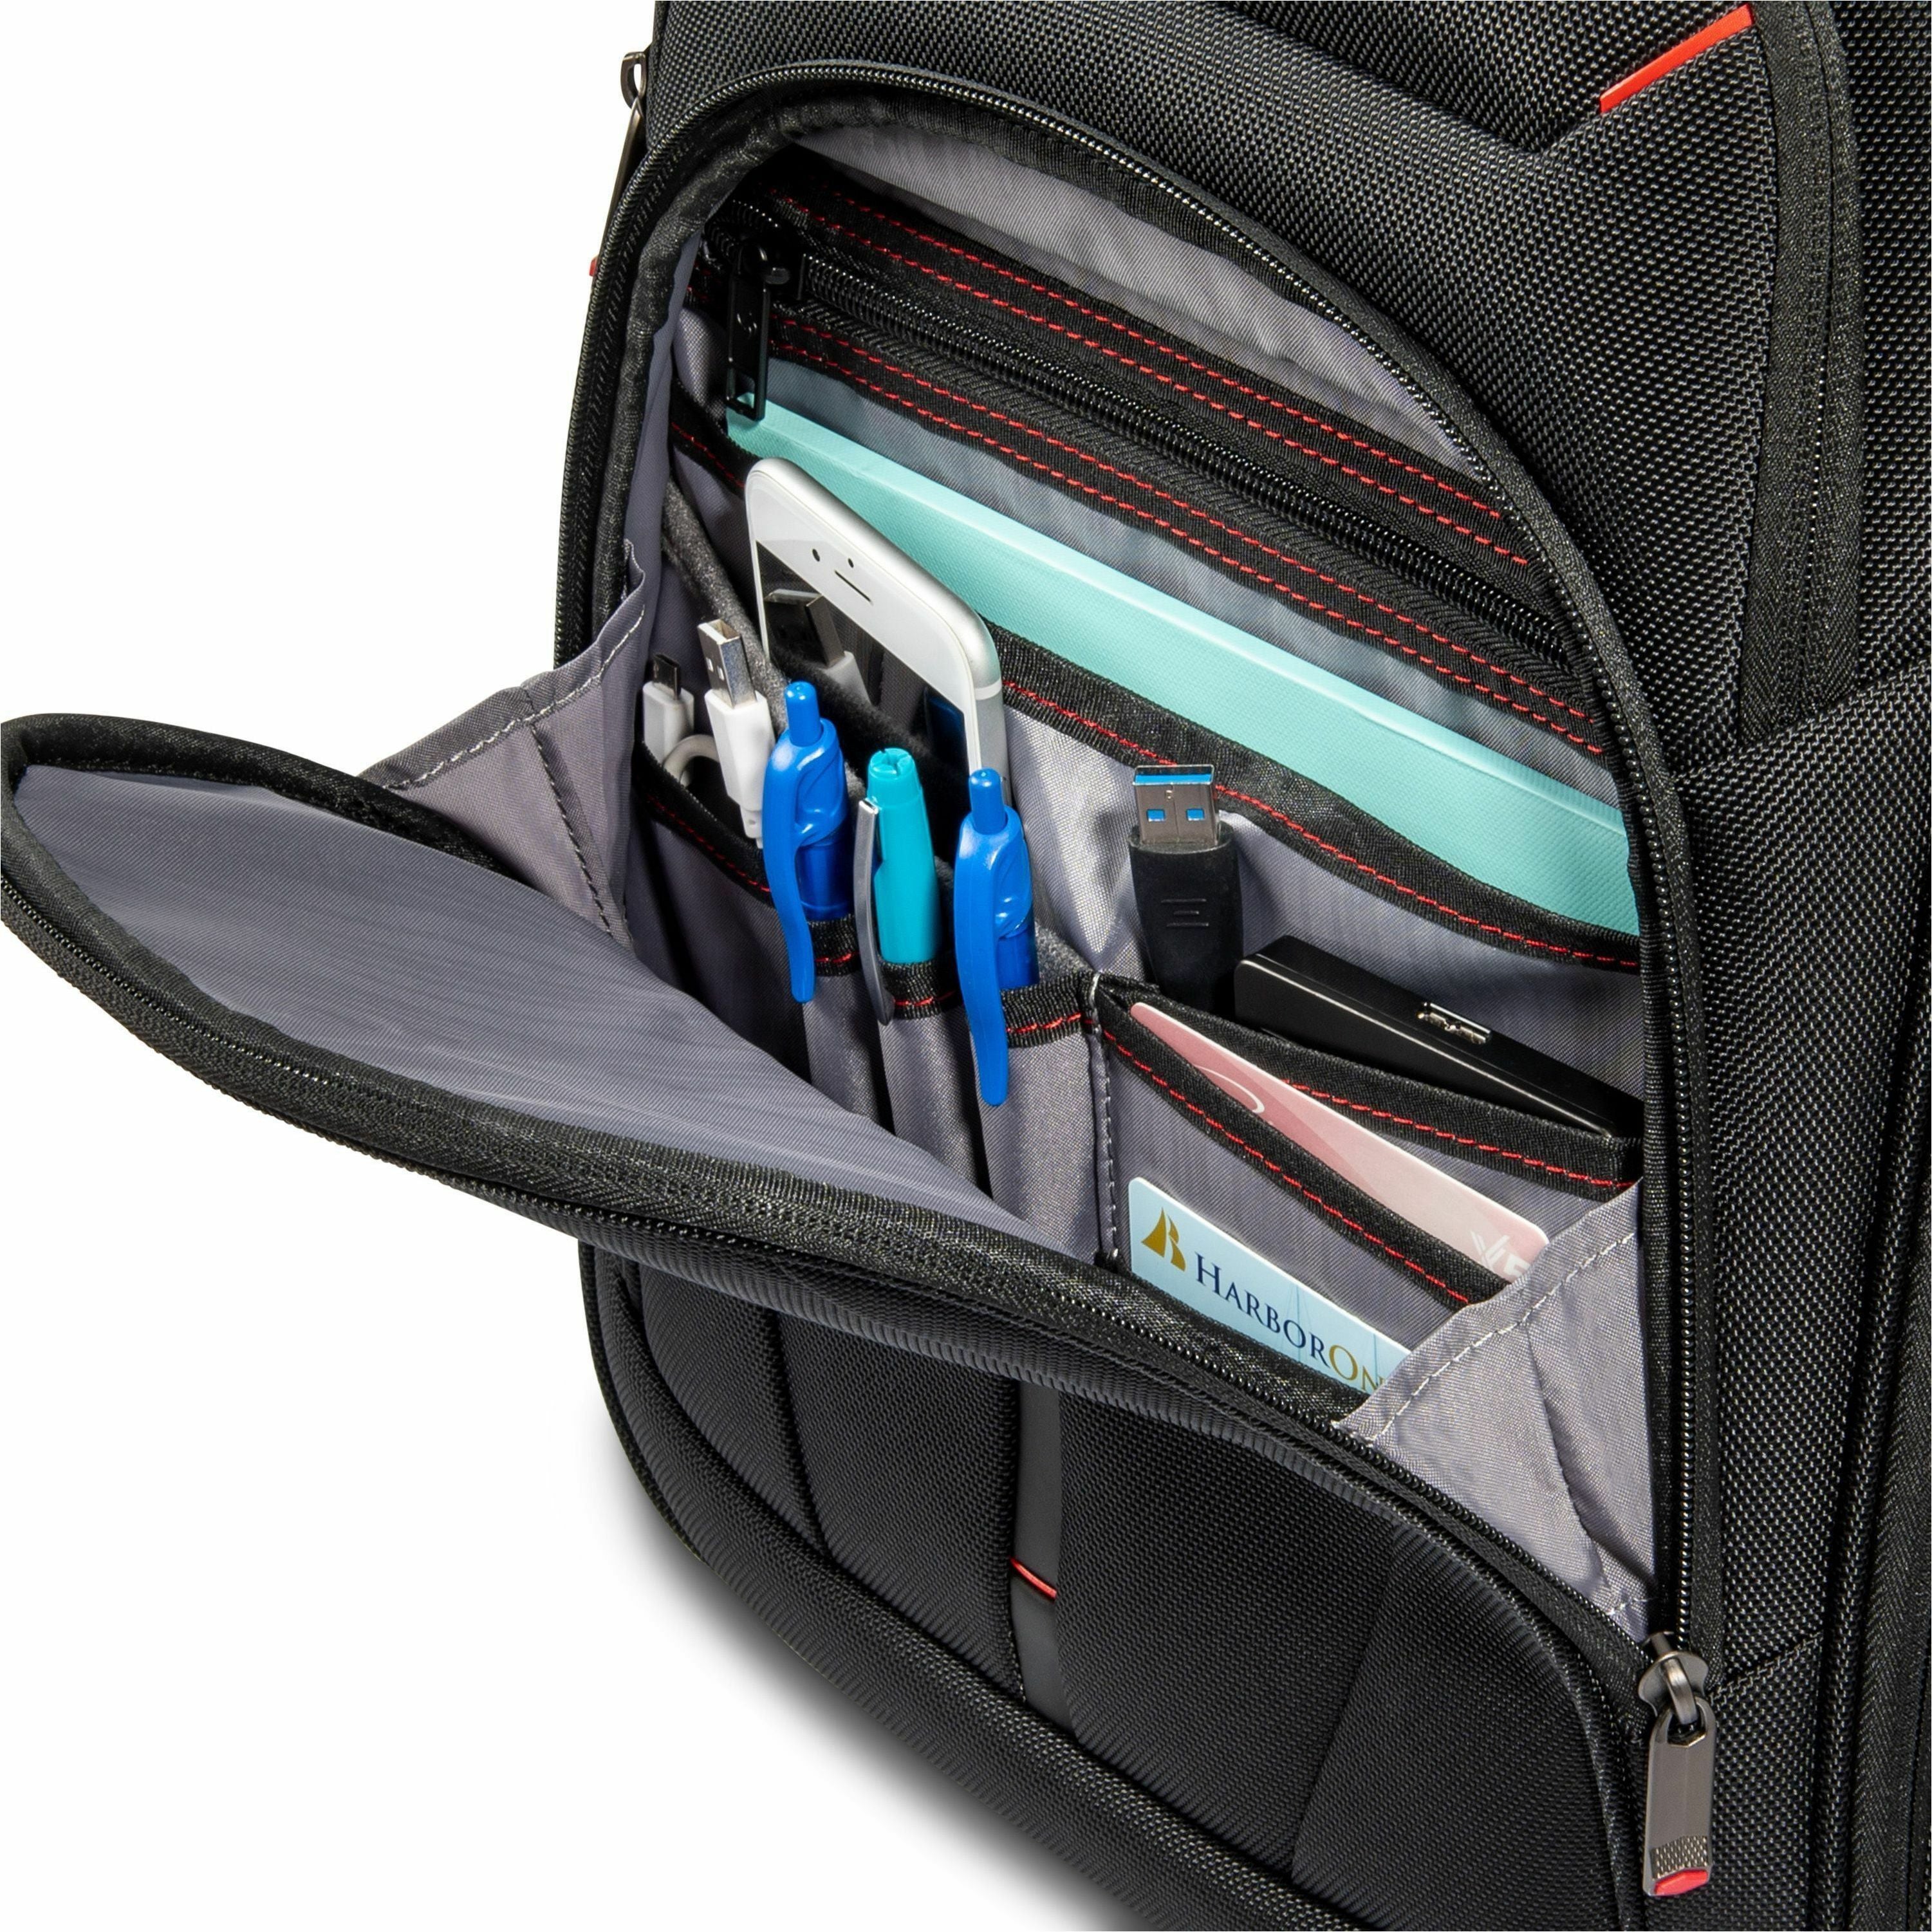 samsonite-carrying-case-backpack-for-129-to-156-notebook-file-book-table-black-1680d-ballistic-polyester-mesh-body-tricot-interior-material-handle-shoulder-strap-1-each_sml1473291041 - 2